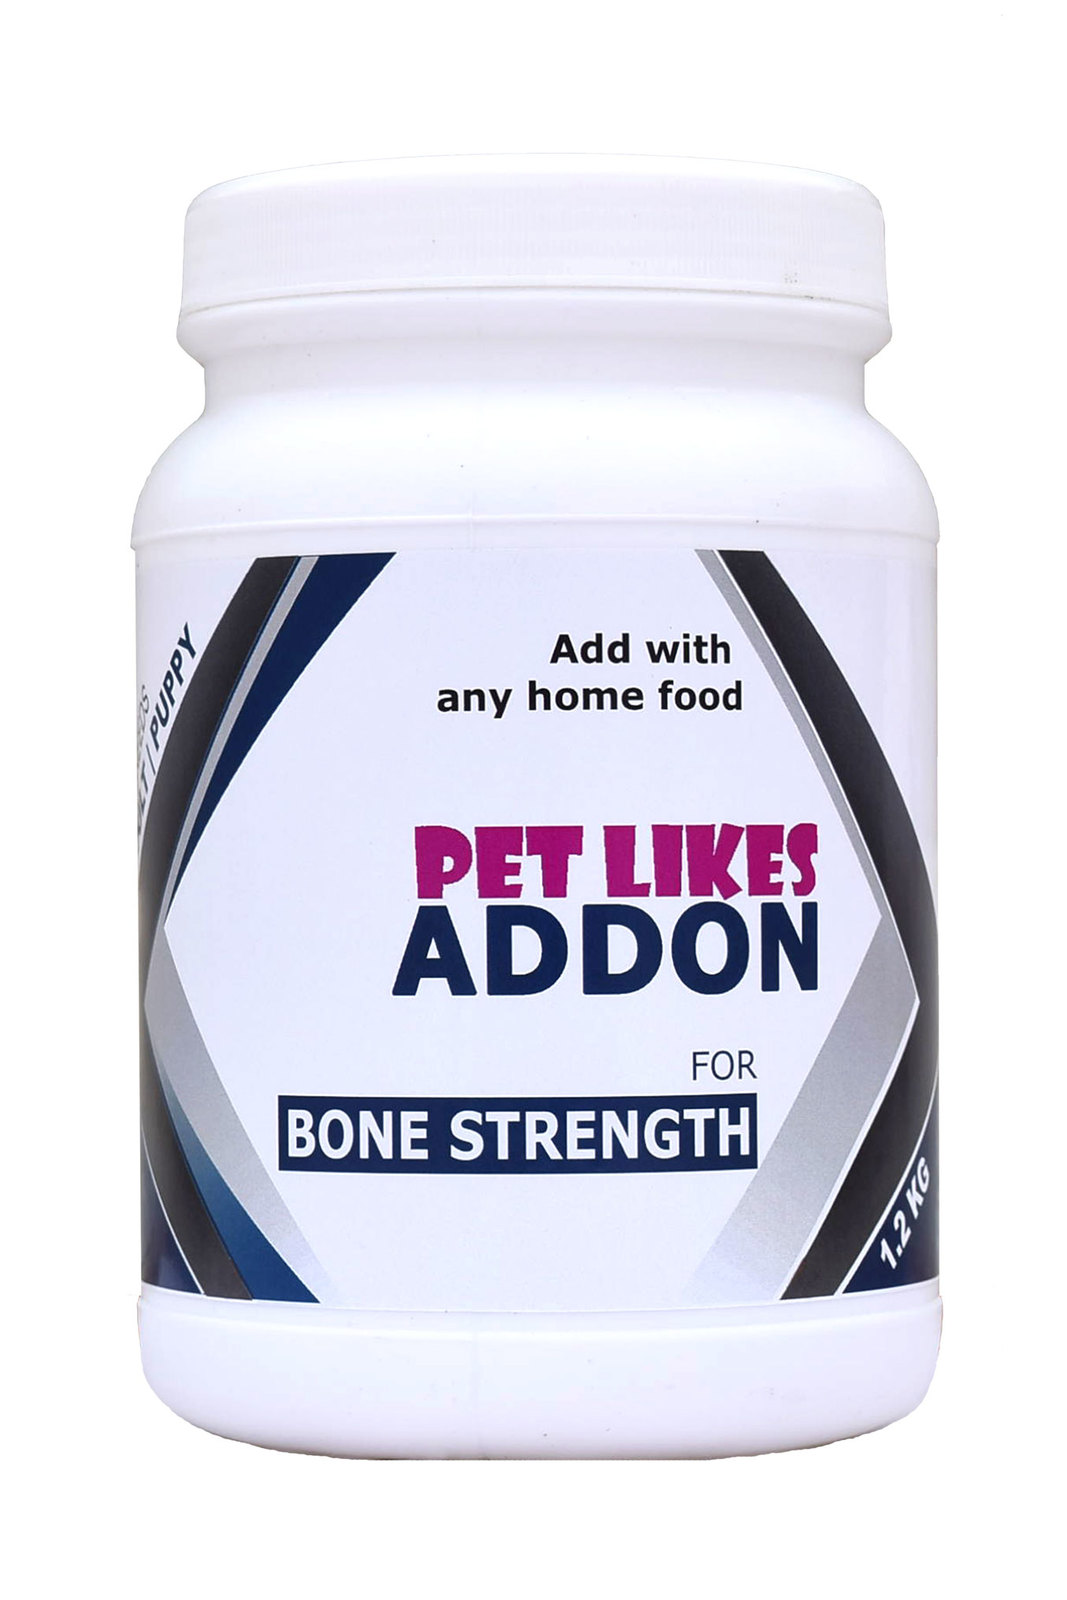 Pet Likes ADD ON Bone Strength – 1.2 Kg. Hip And Joint Support